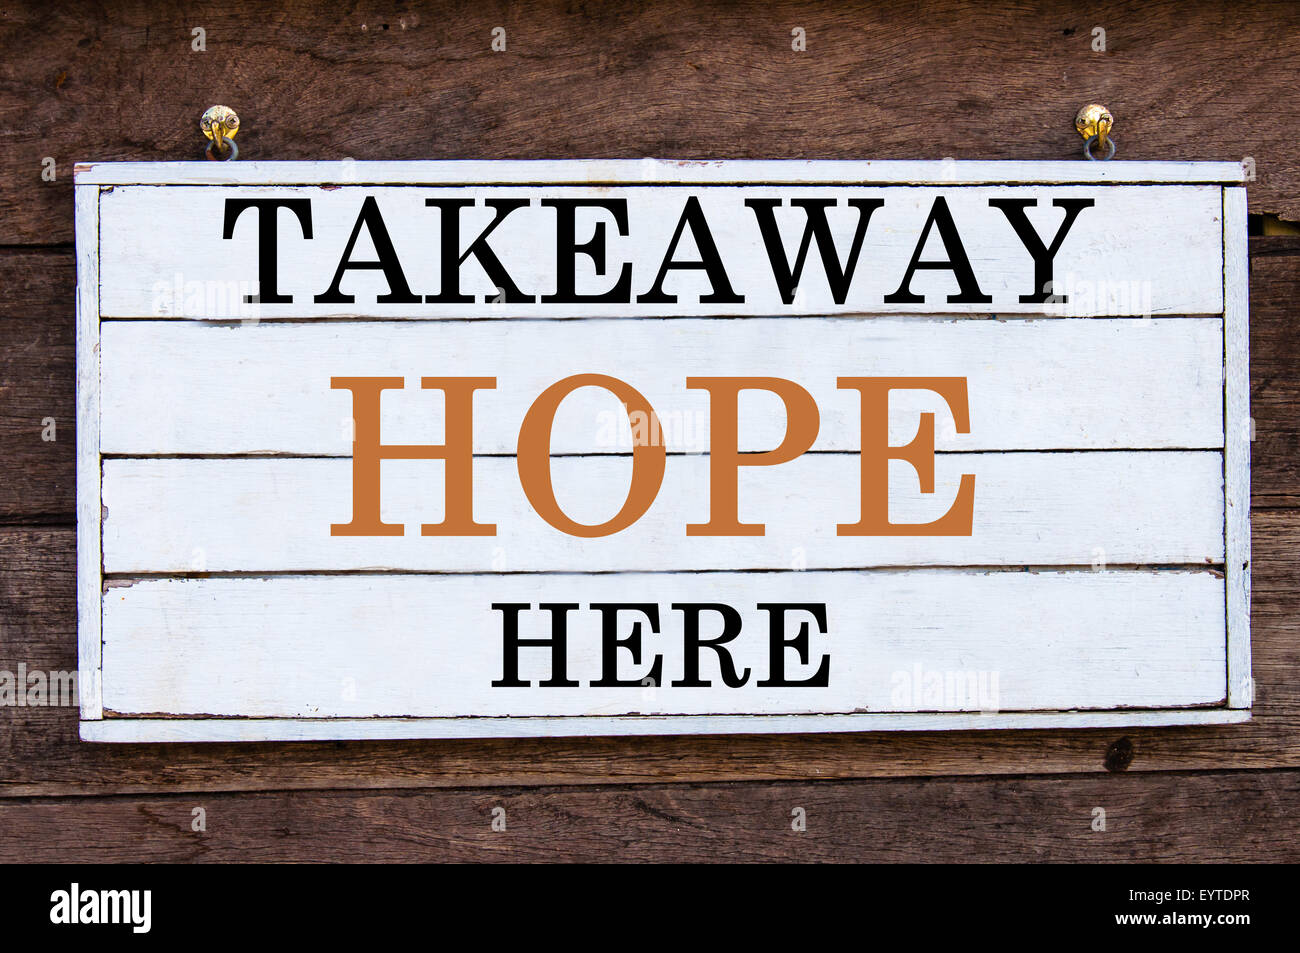 Takeaway Hope Here Inspirational message written on vintage wooden board. Motivation concept image Stock Photo